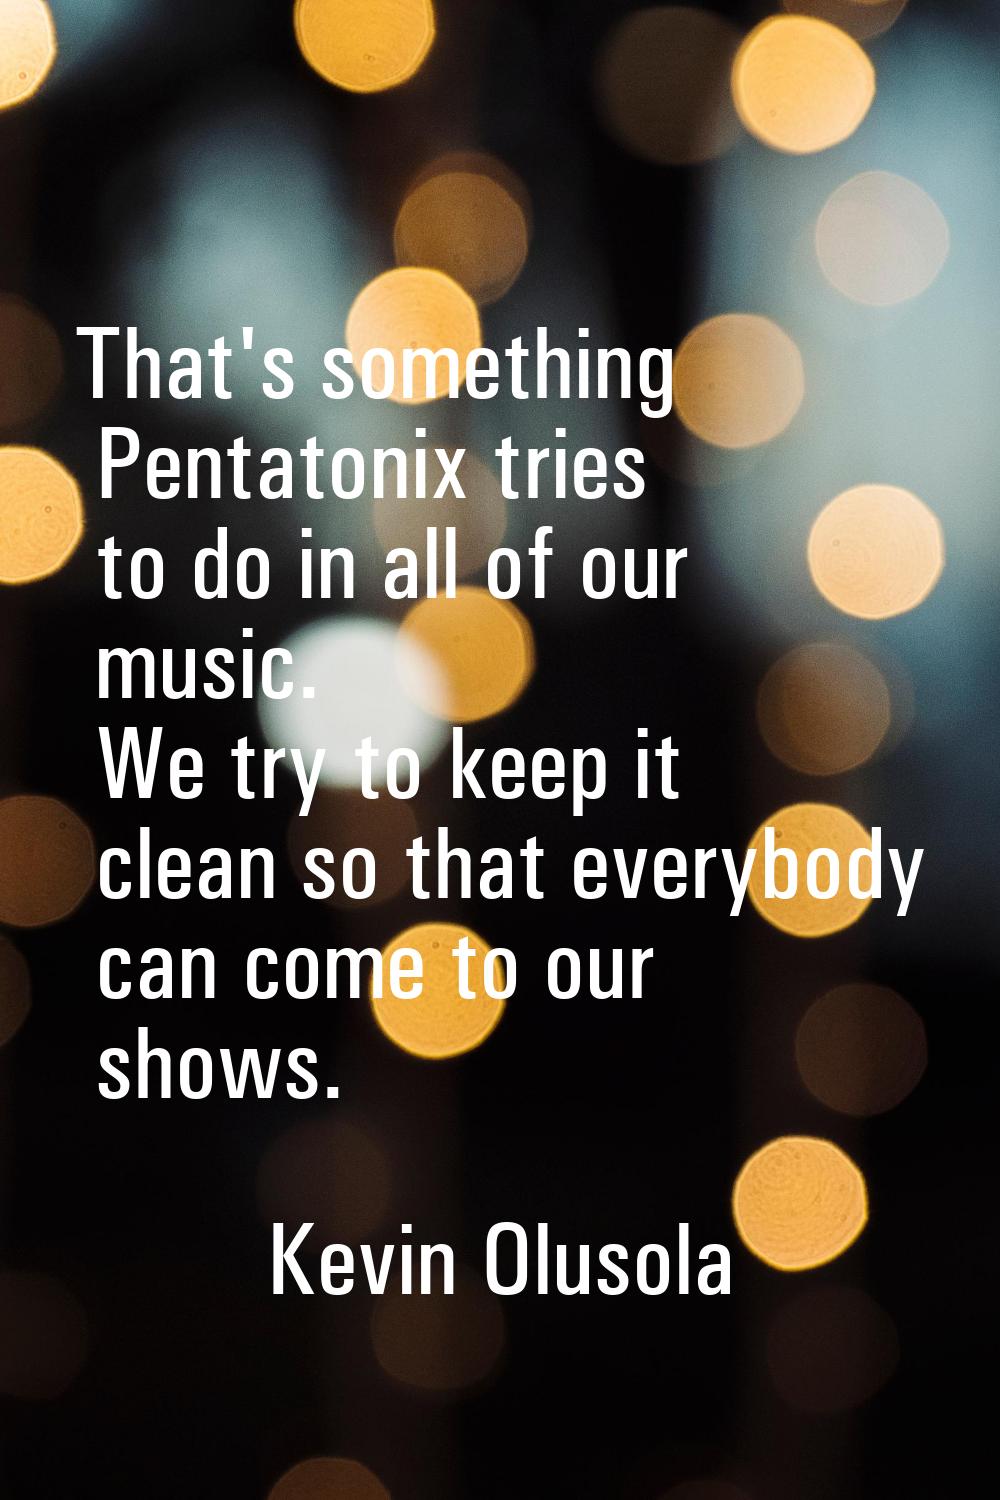 That's something Pentatonix tries to do in all of our music. We try to keep it clean so that everyb